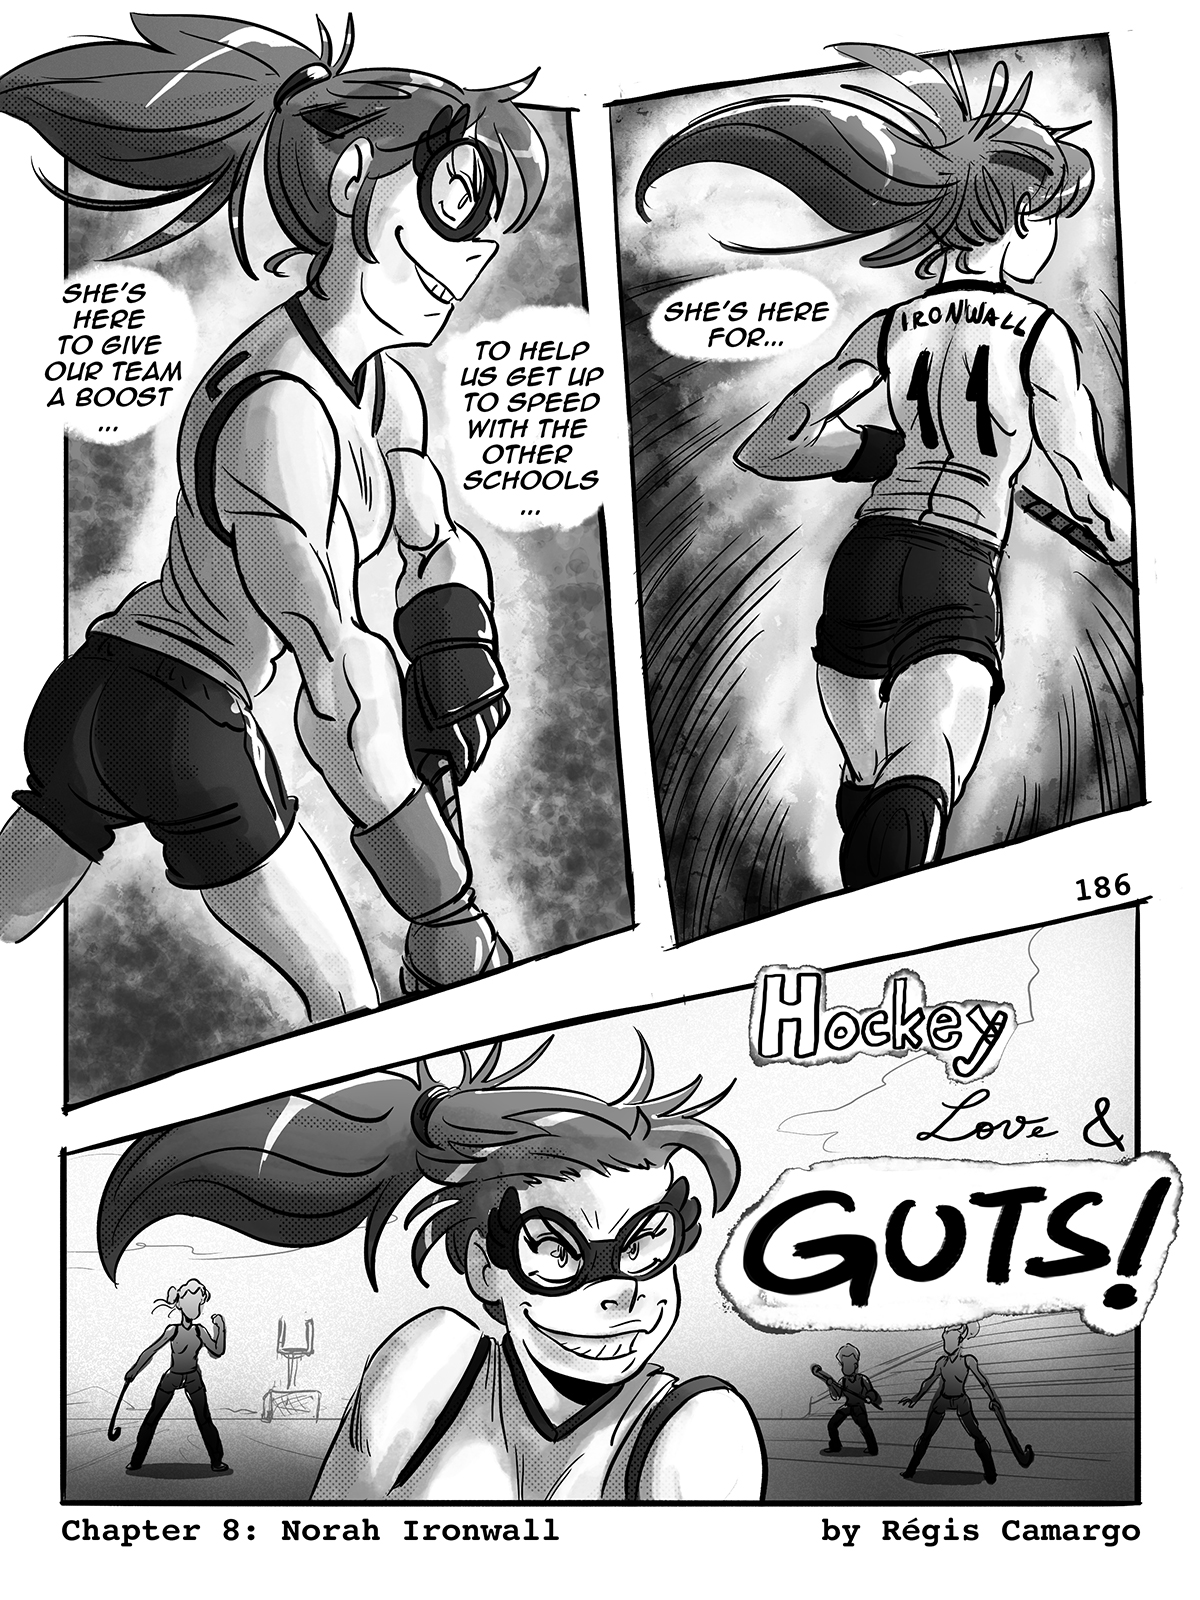 Hockey, Love, & GUTS! – Chapter 8 – Page 186